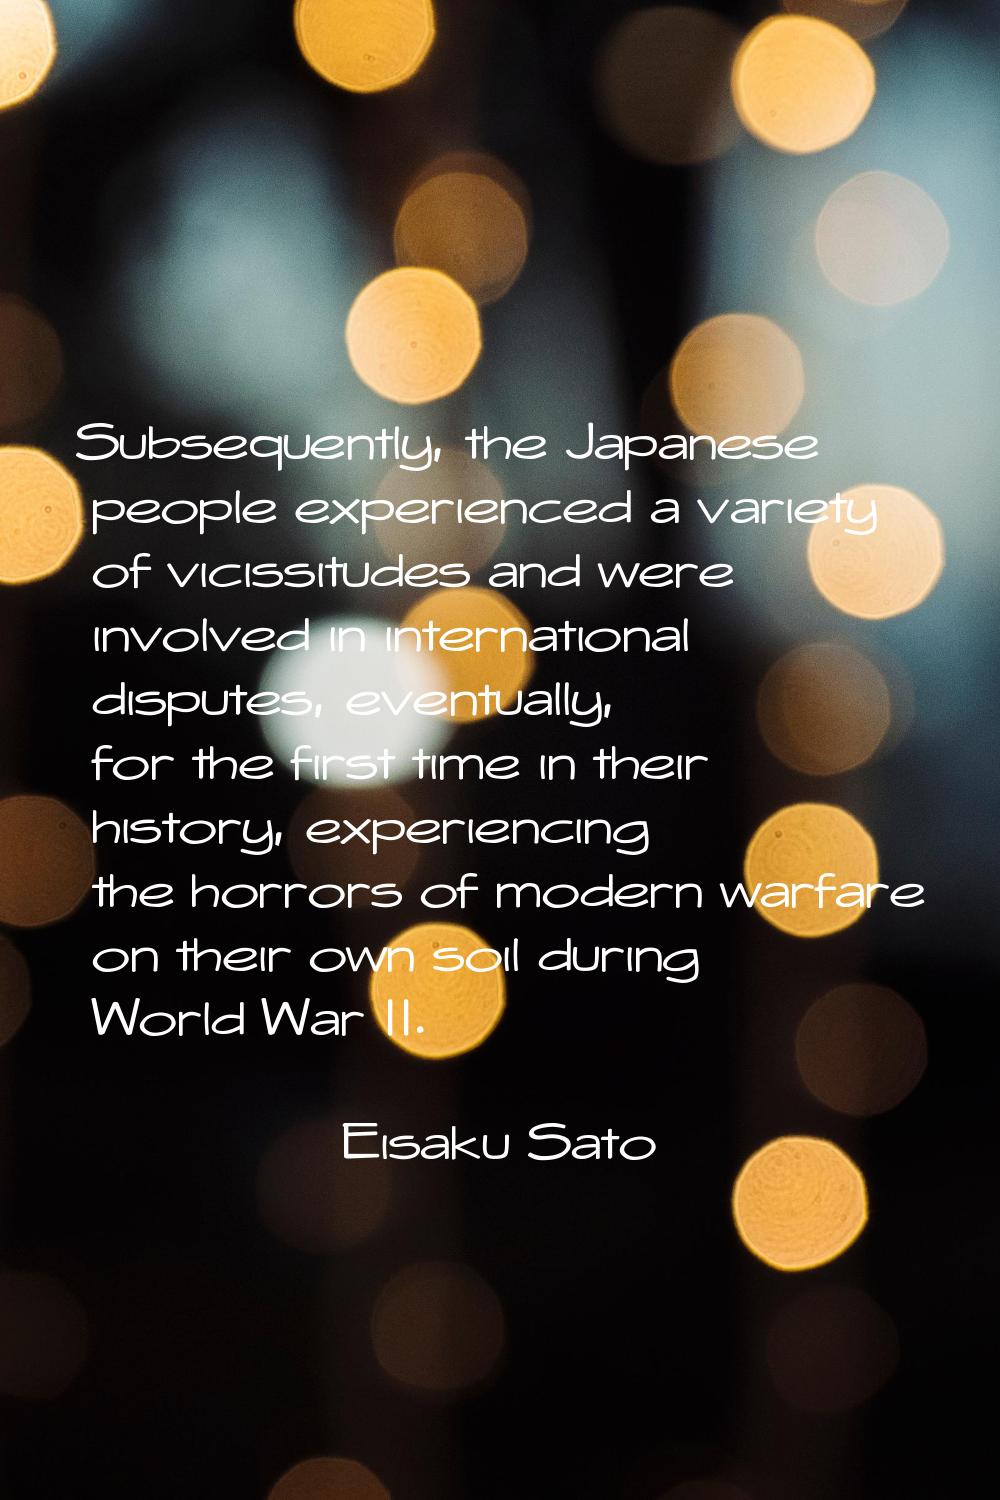 Subsequently, the Japanese people experienced a variety of vicissitudes and were involved in intern